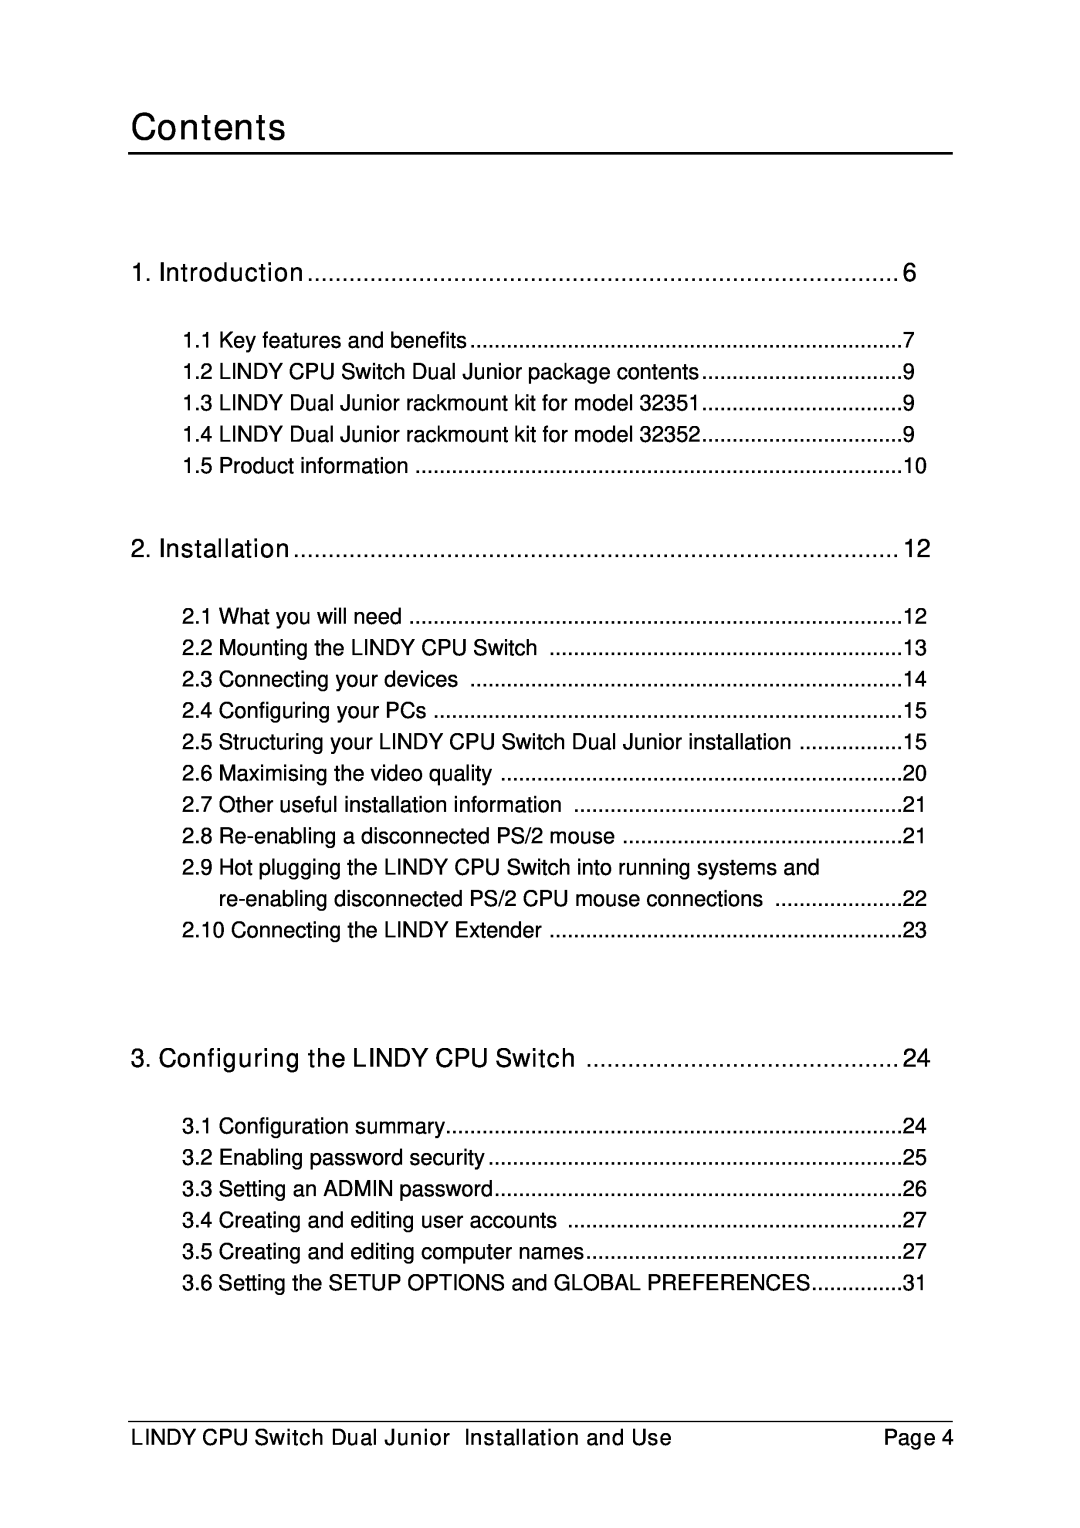 Lindy 32351, 32352 manual Contents, Introduction, Installation, Configuring the LINDY CPU Switch, Page 